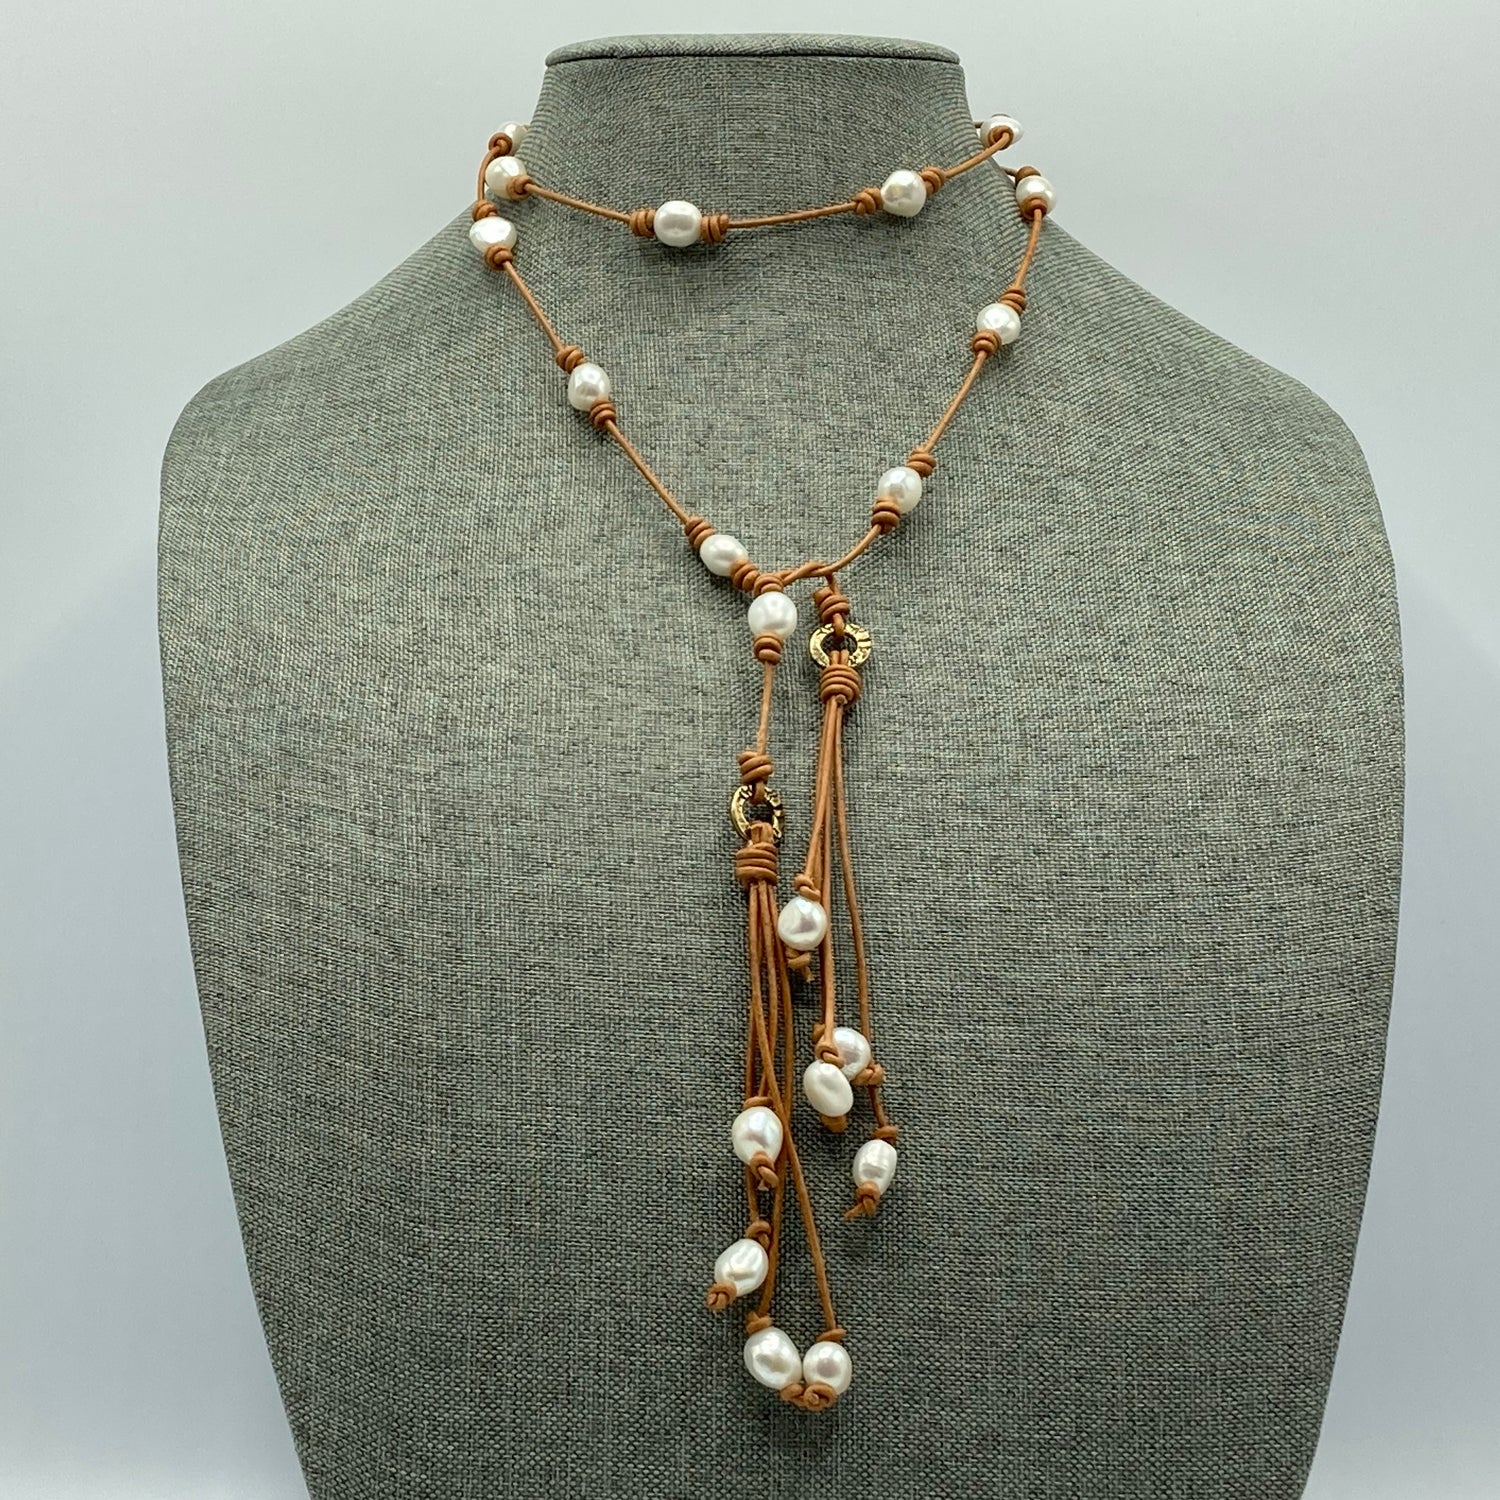 This lariat is made with large hole pearls and 1.5mm leather and can be worn in a variety of lengths.